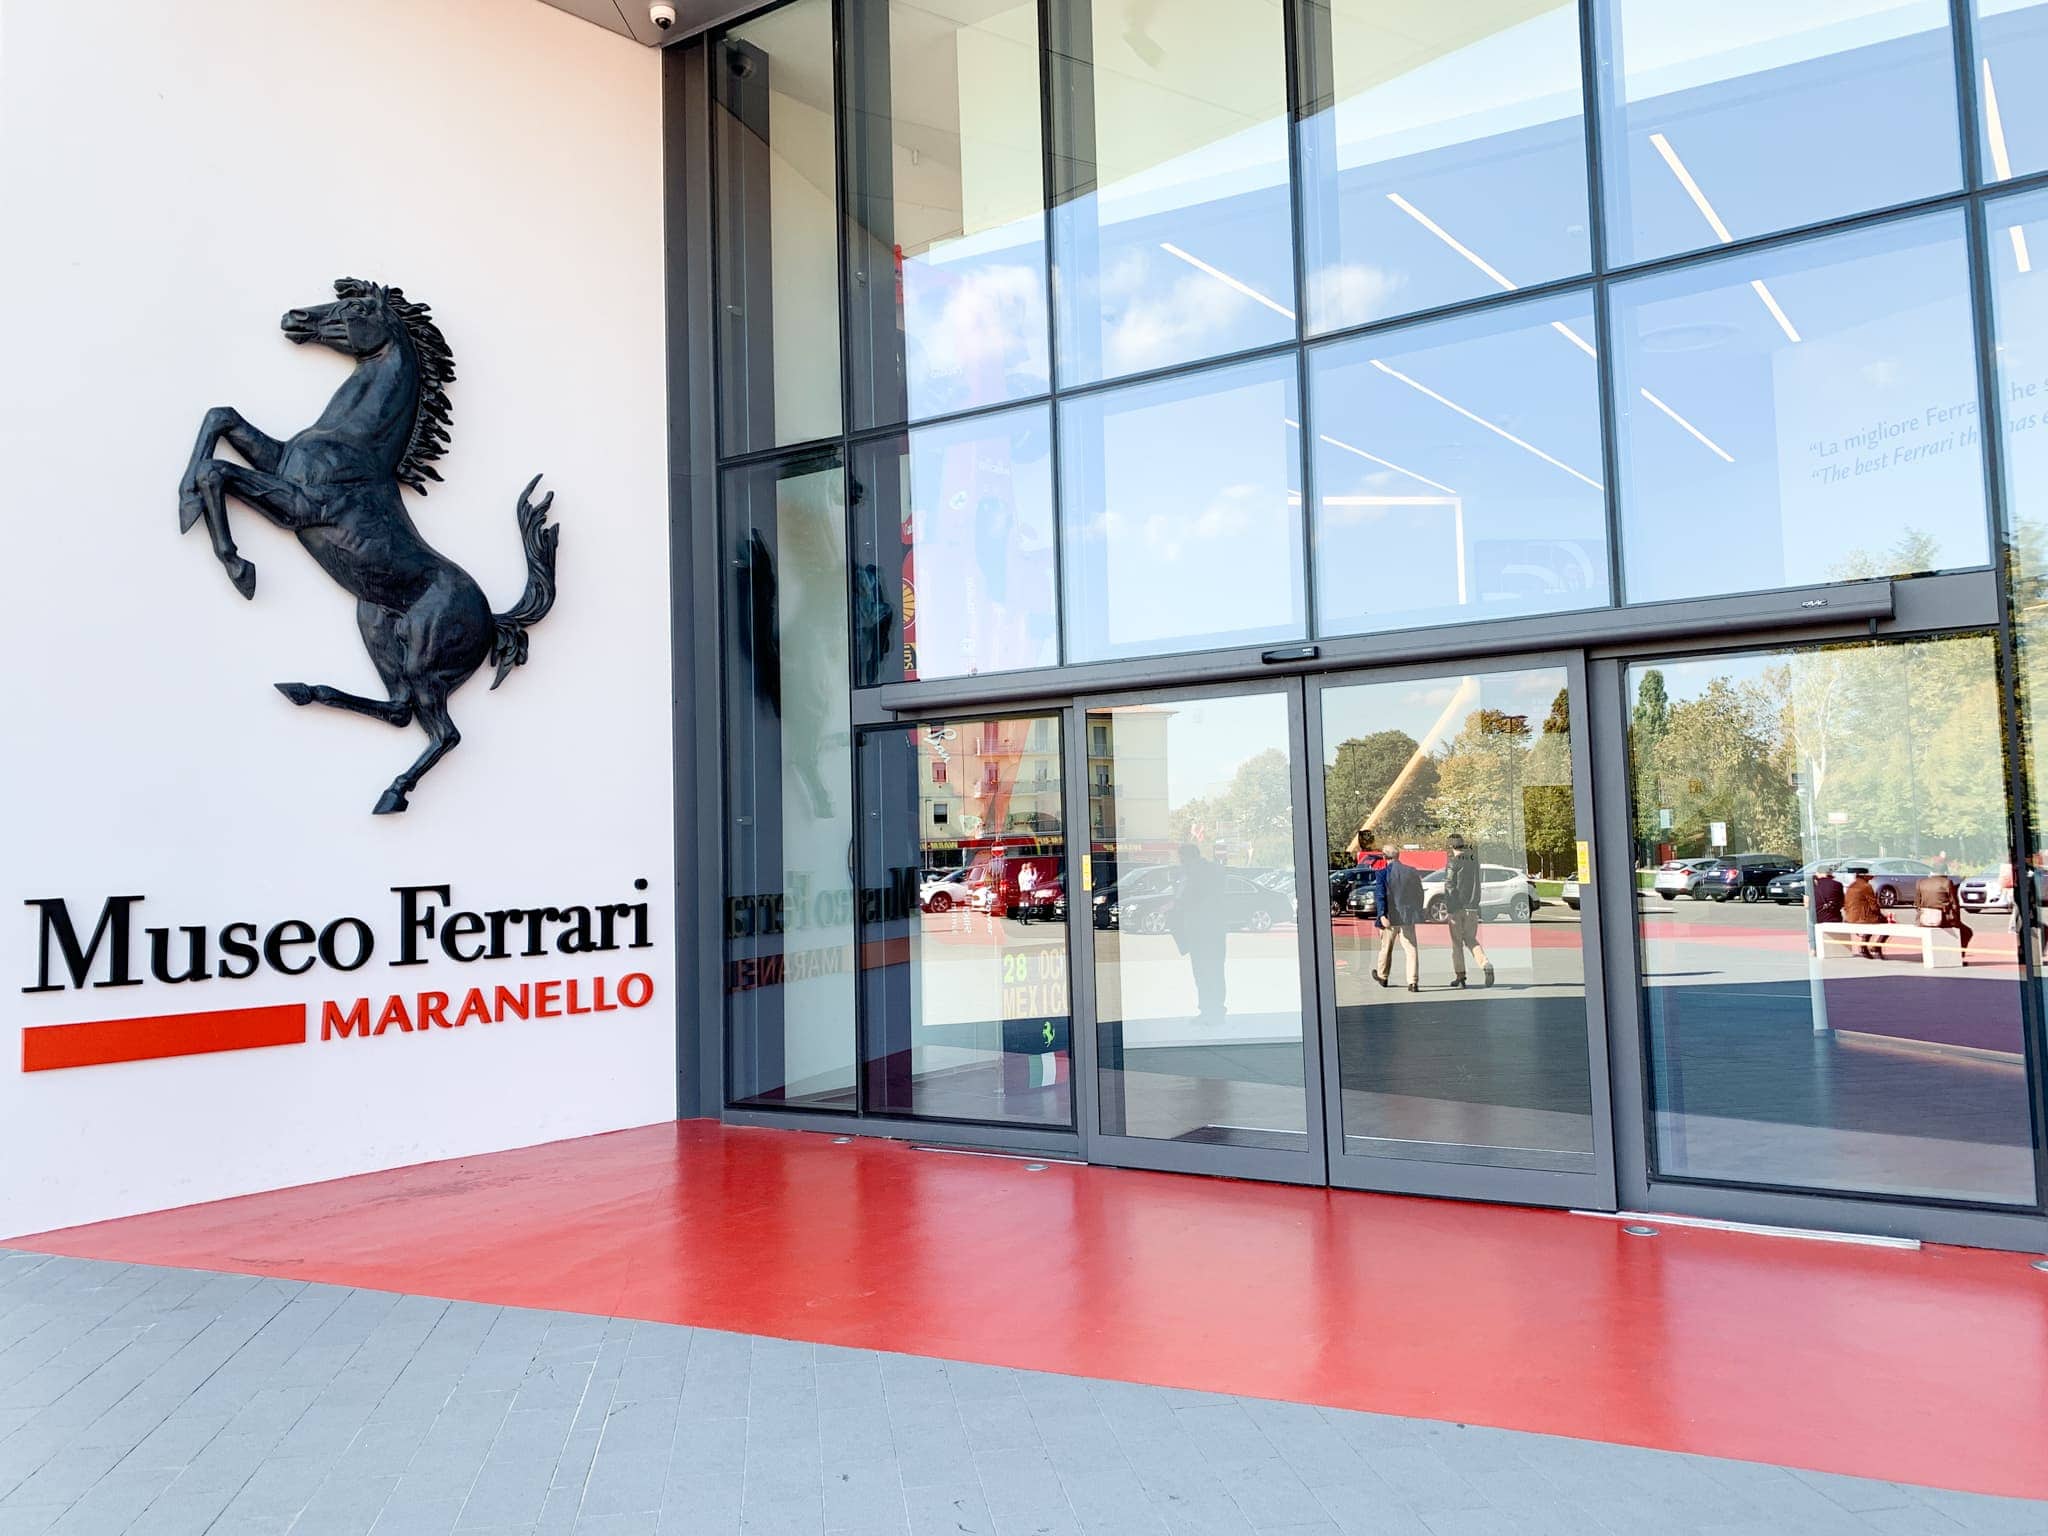 Visiting the Ferrari Museum in Maranello is a part of the food and Ferrari tour